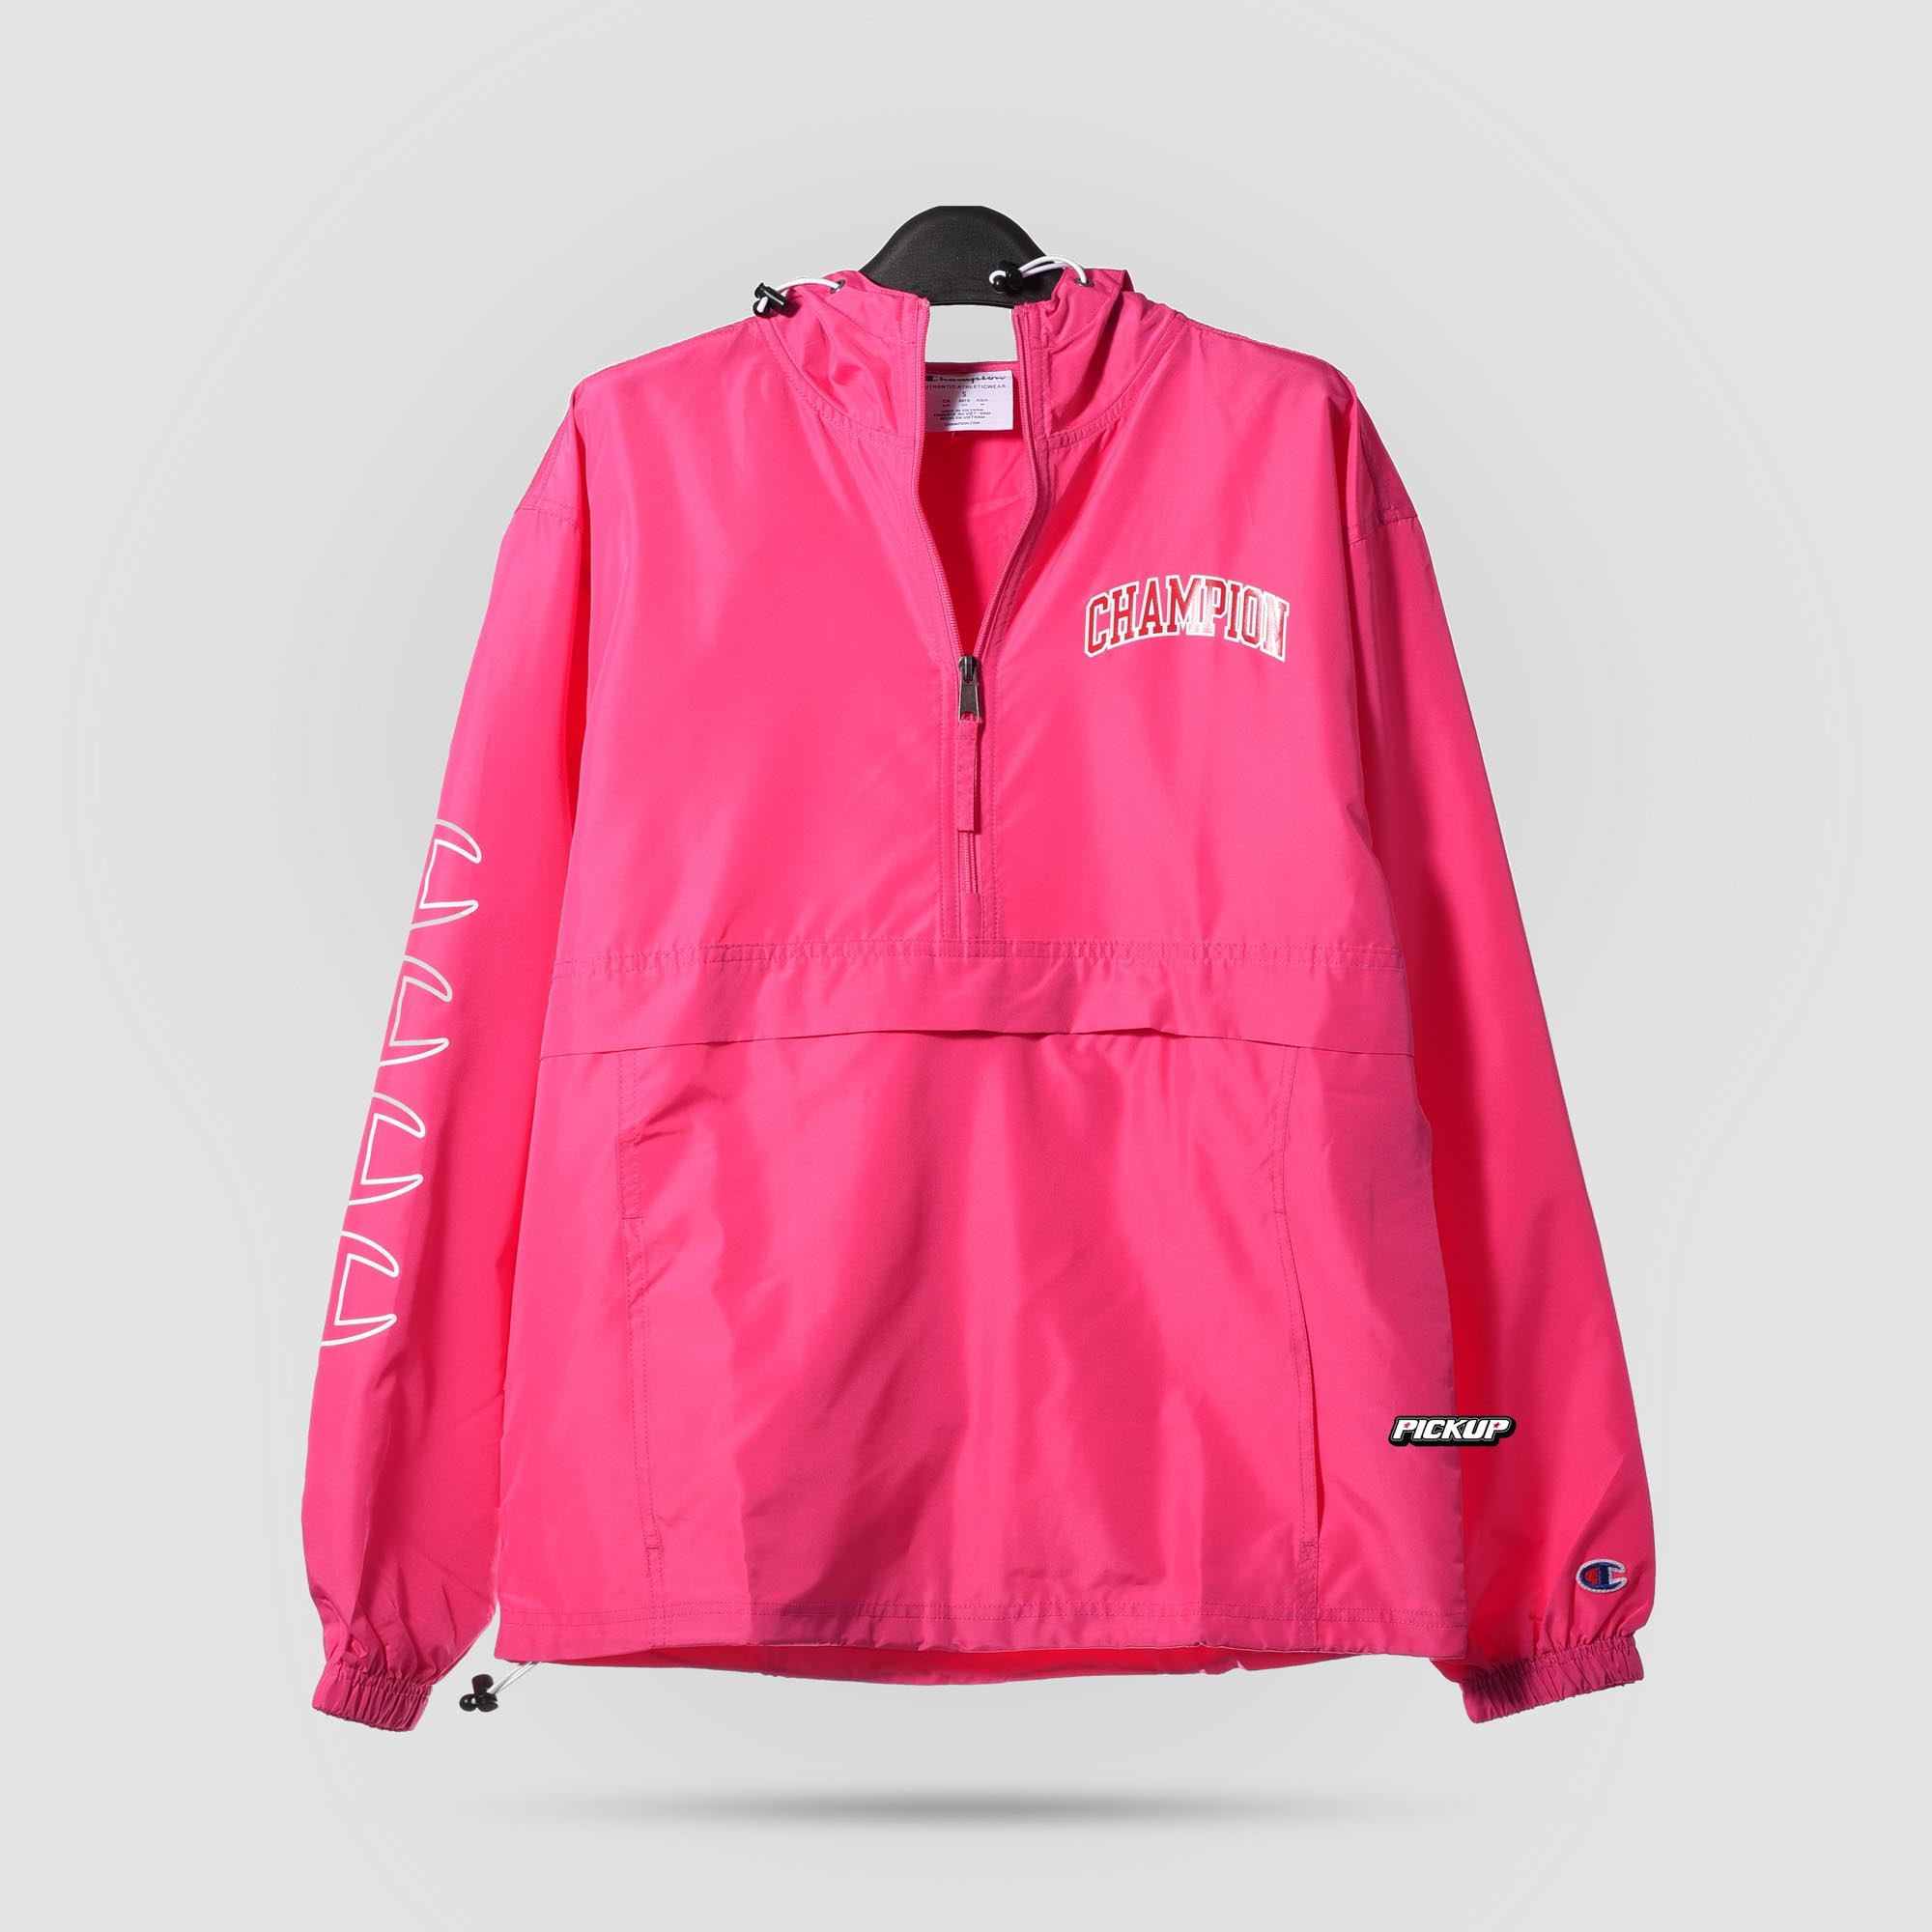 CHAMPION PACKABLE JACKET PRINTED - PINK